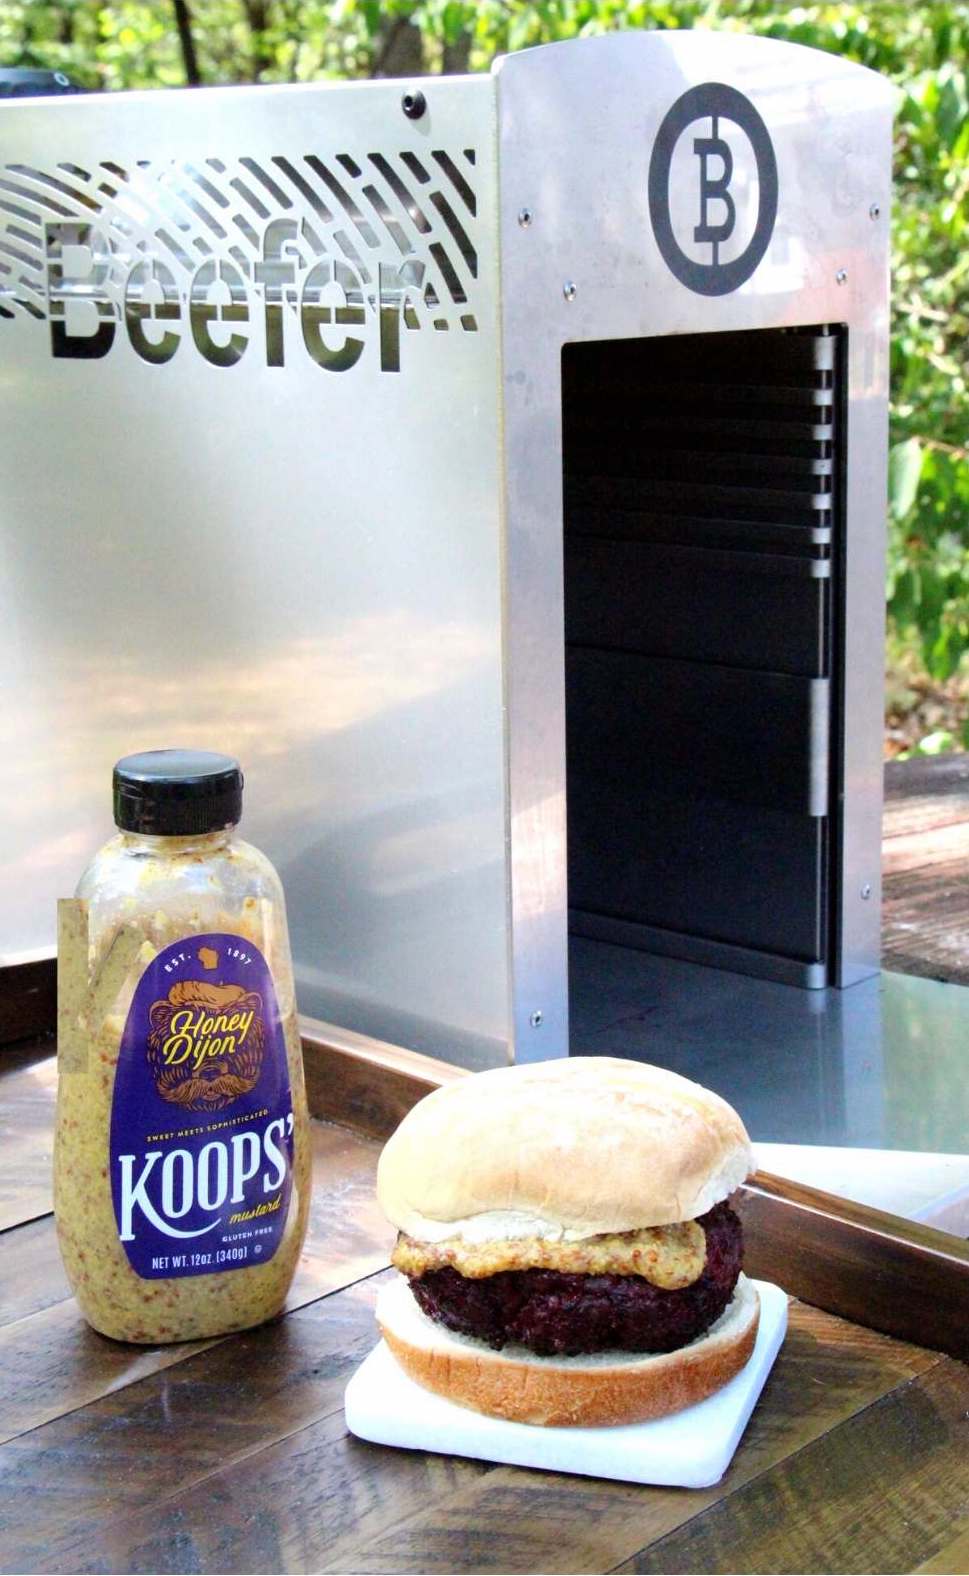 koops' mustard and beefer with burger